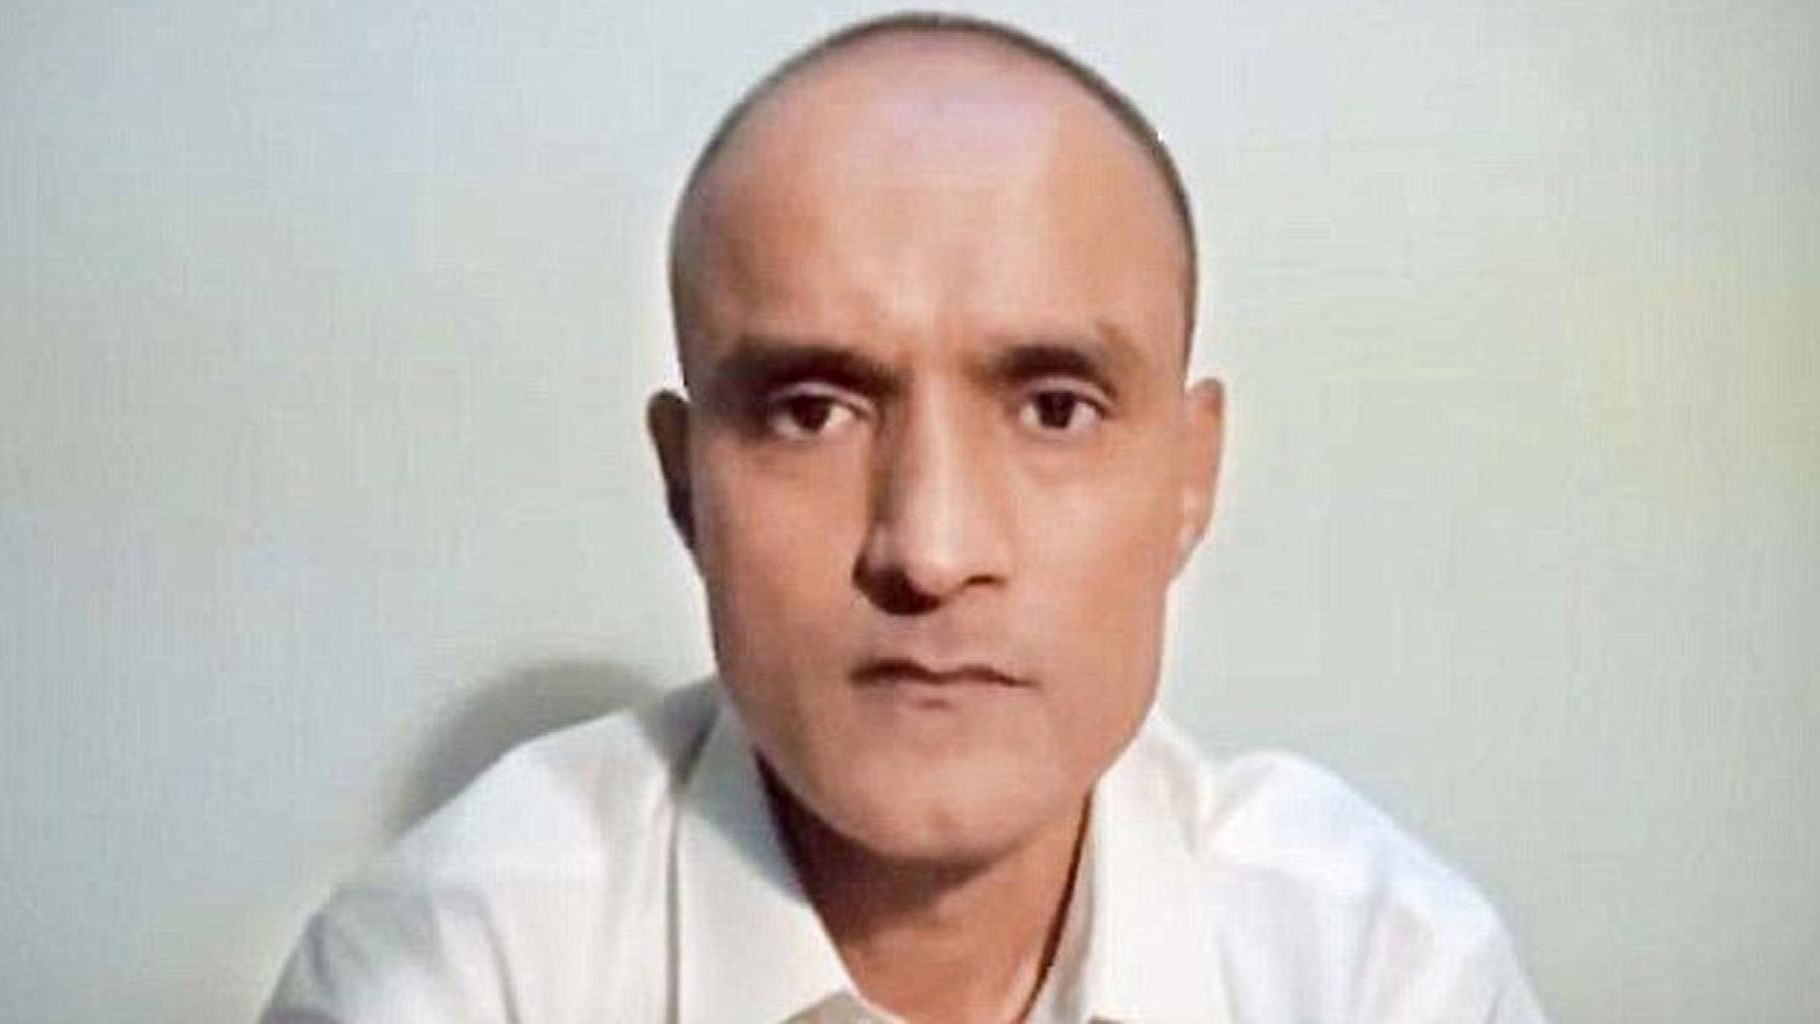 Indian national Kulbhushan Jadhav, who Islamabad claims is an Indian spy, was on Monday sentenced to death by a Pakistani military court. (Photo Courtesy: YouTube/Dawn News)